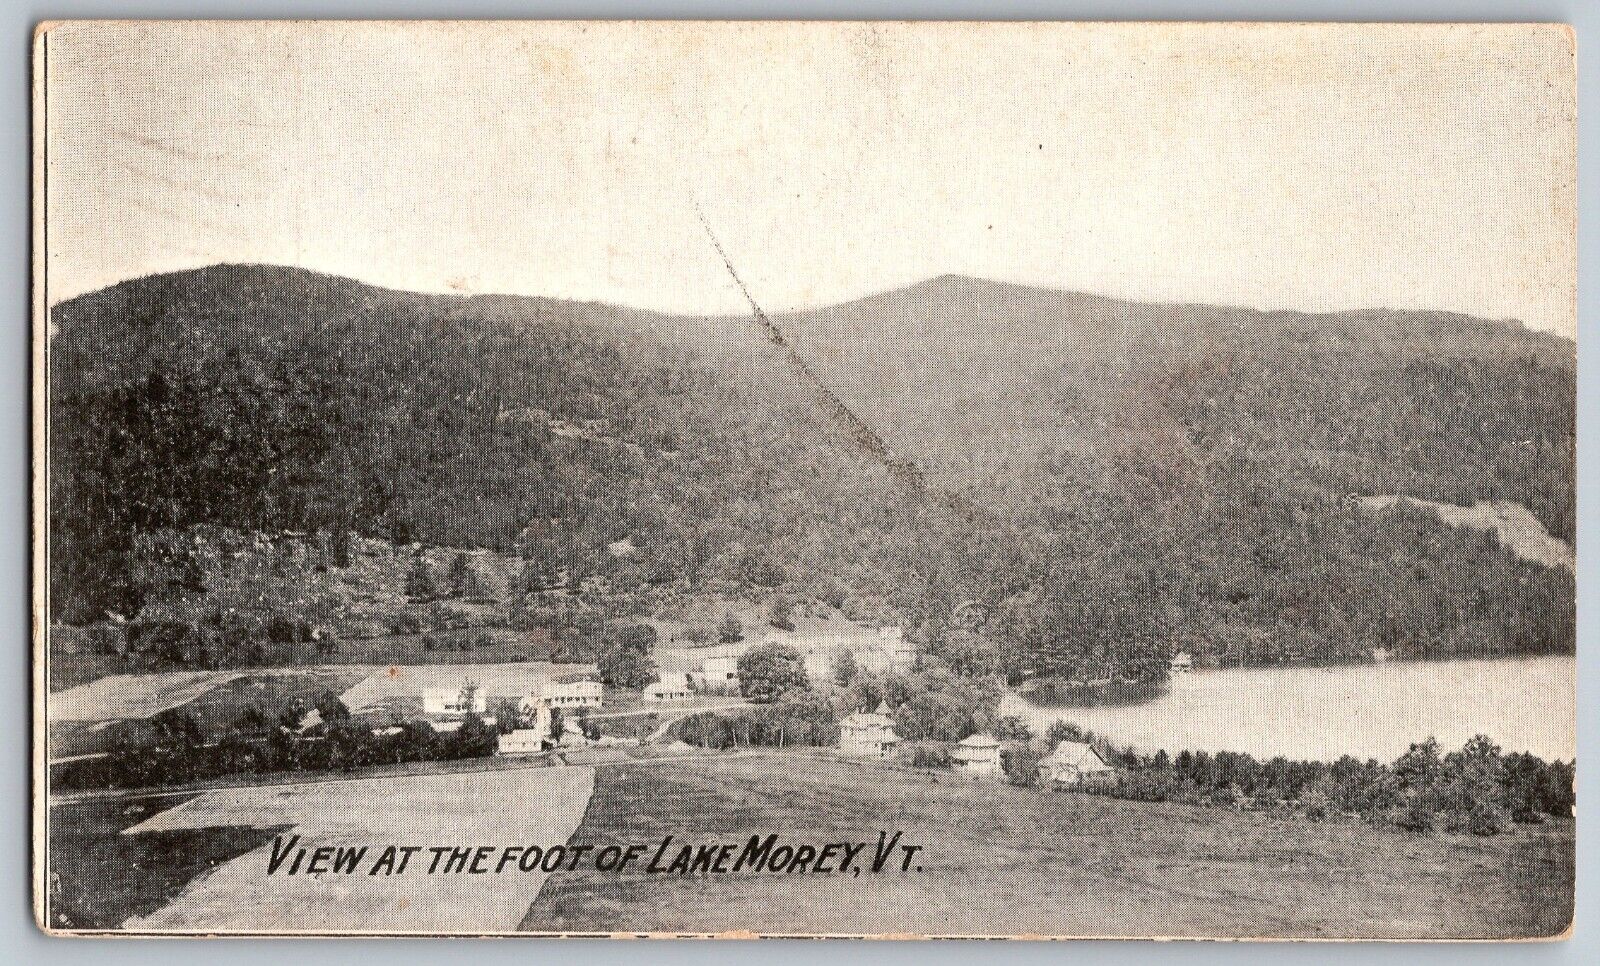 Vermont VT - View of the Foot of Lake Morey - Vintage Postcard - Posted 1907